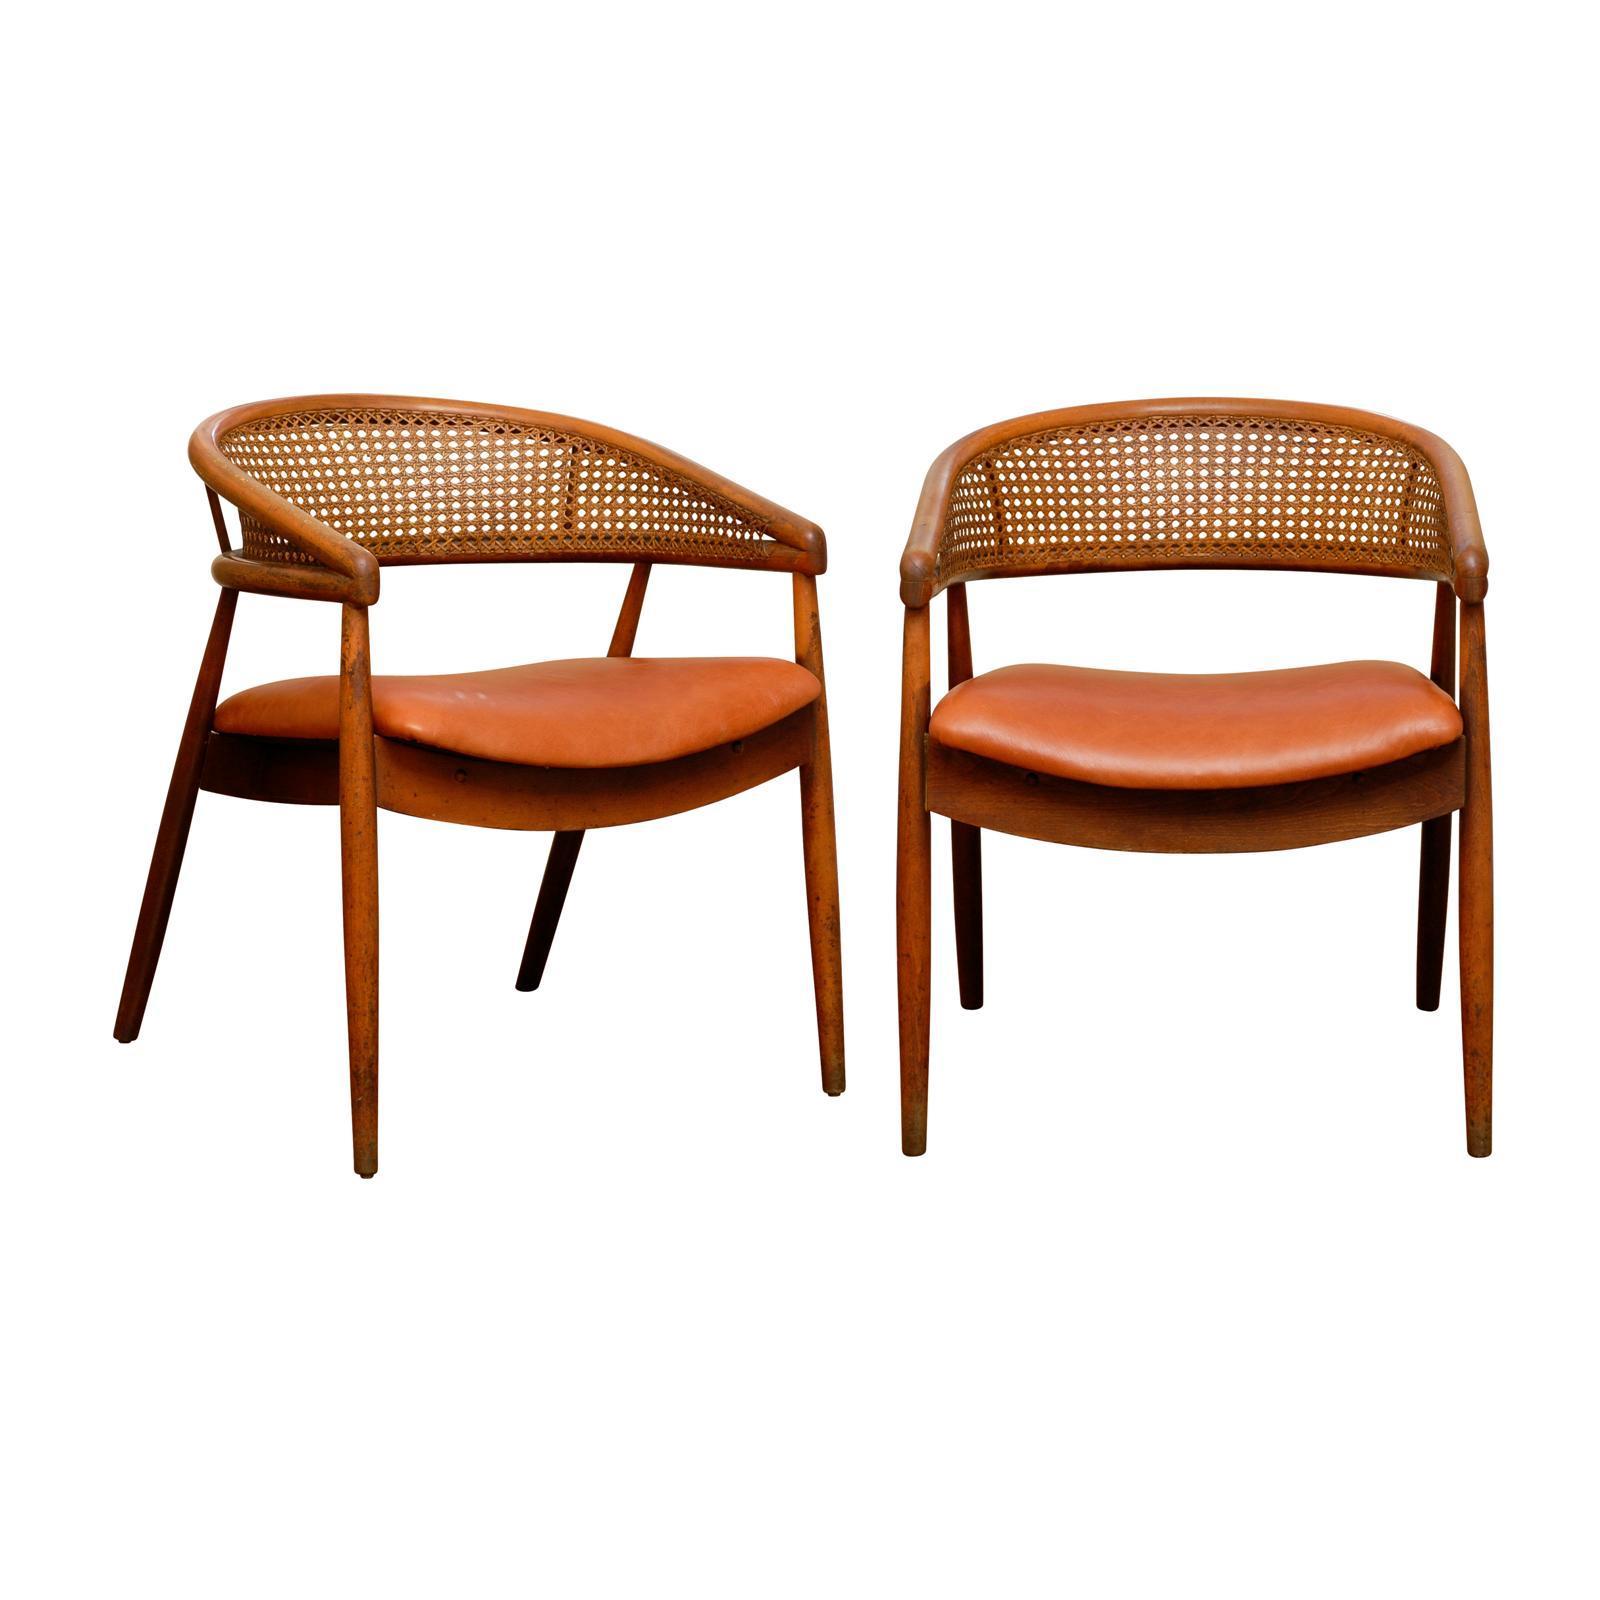 Rare Pair of James Mont Style Bent Beech and Cane Arm Chairs For Sale